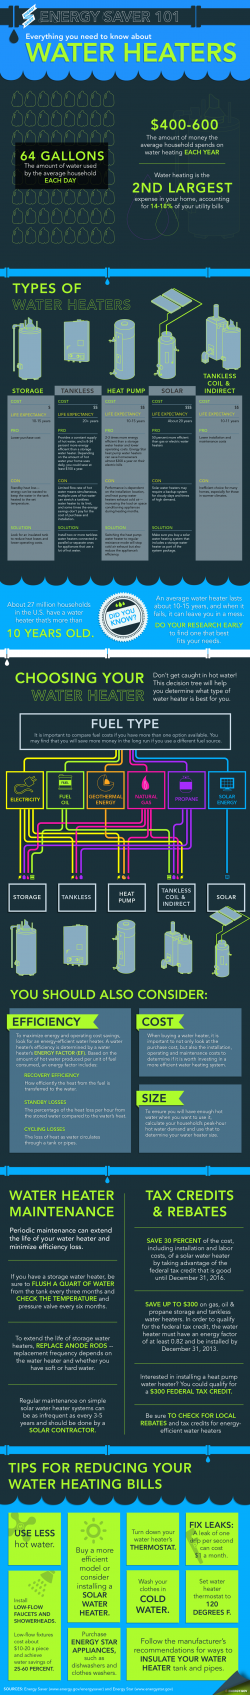 New Energy Saver 101 infographic lays out the different types of water heaters on the market and will help you figure out how to select the best model for your home. Download a high-resolution version of the <a href="/node/612506">infographic</a>. | Infographic by Sarah Gerrity.